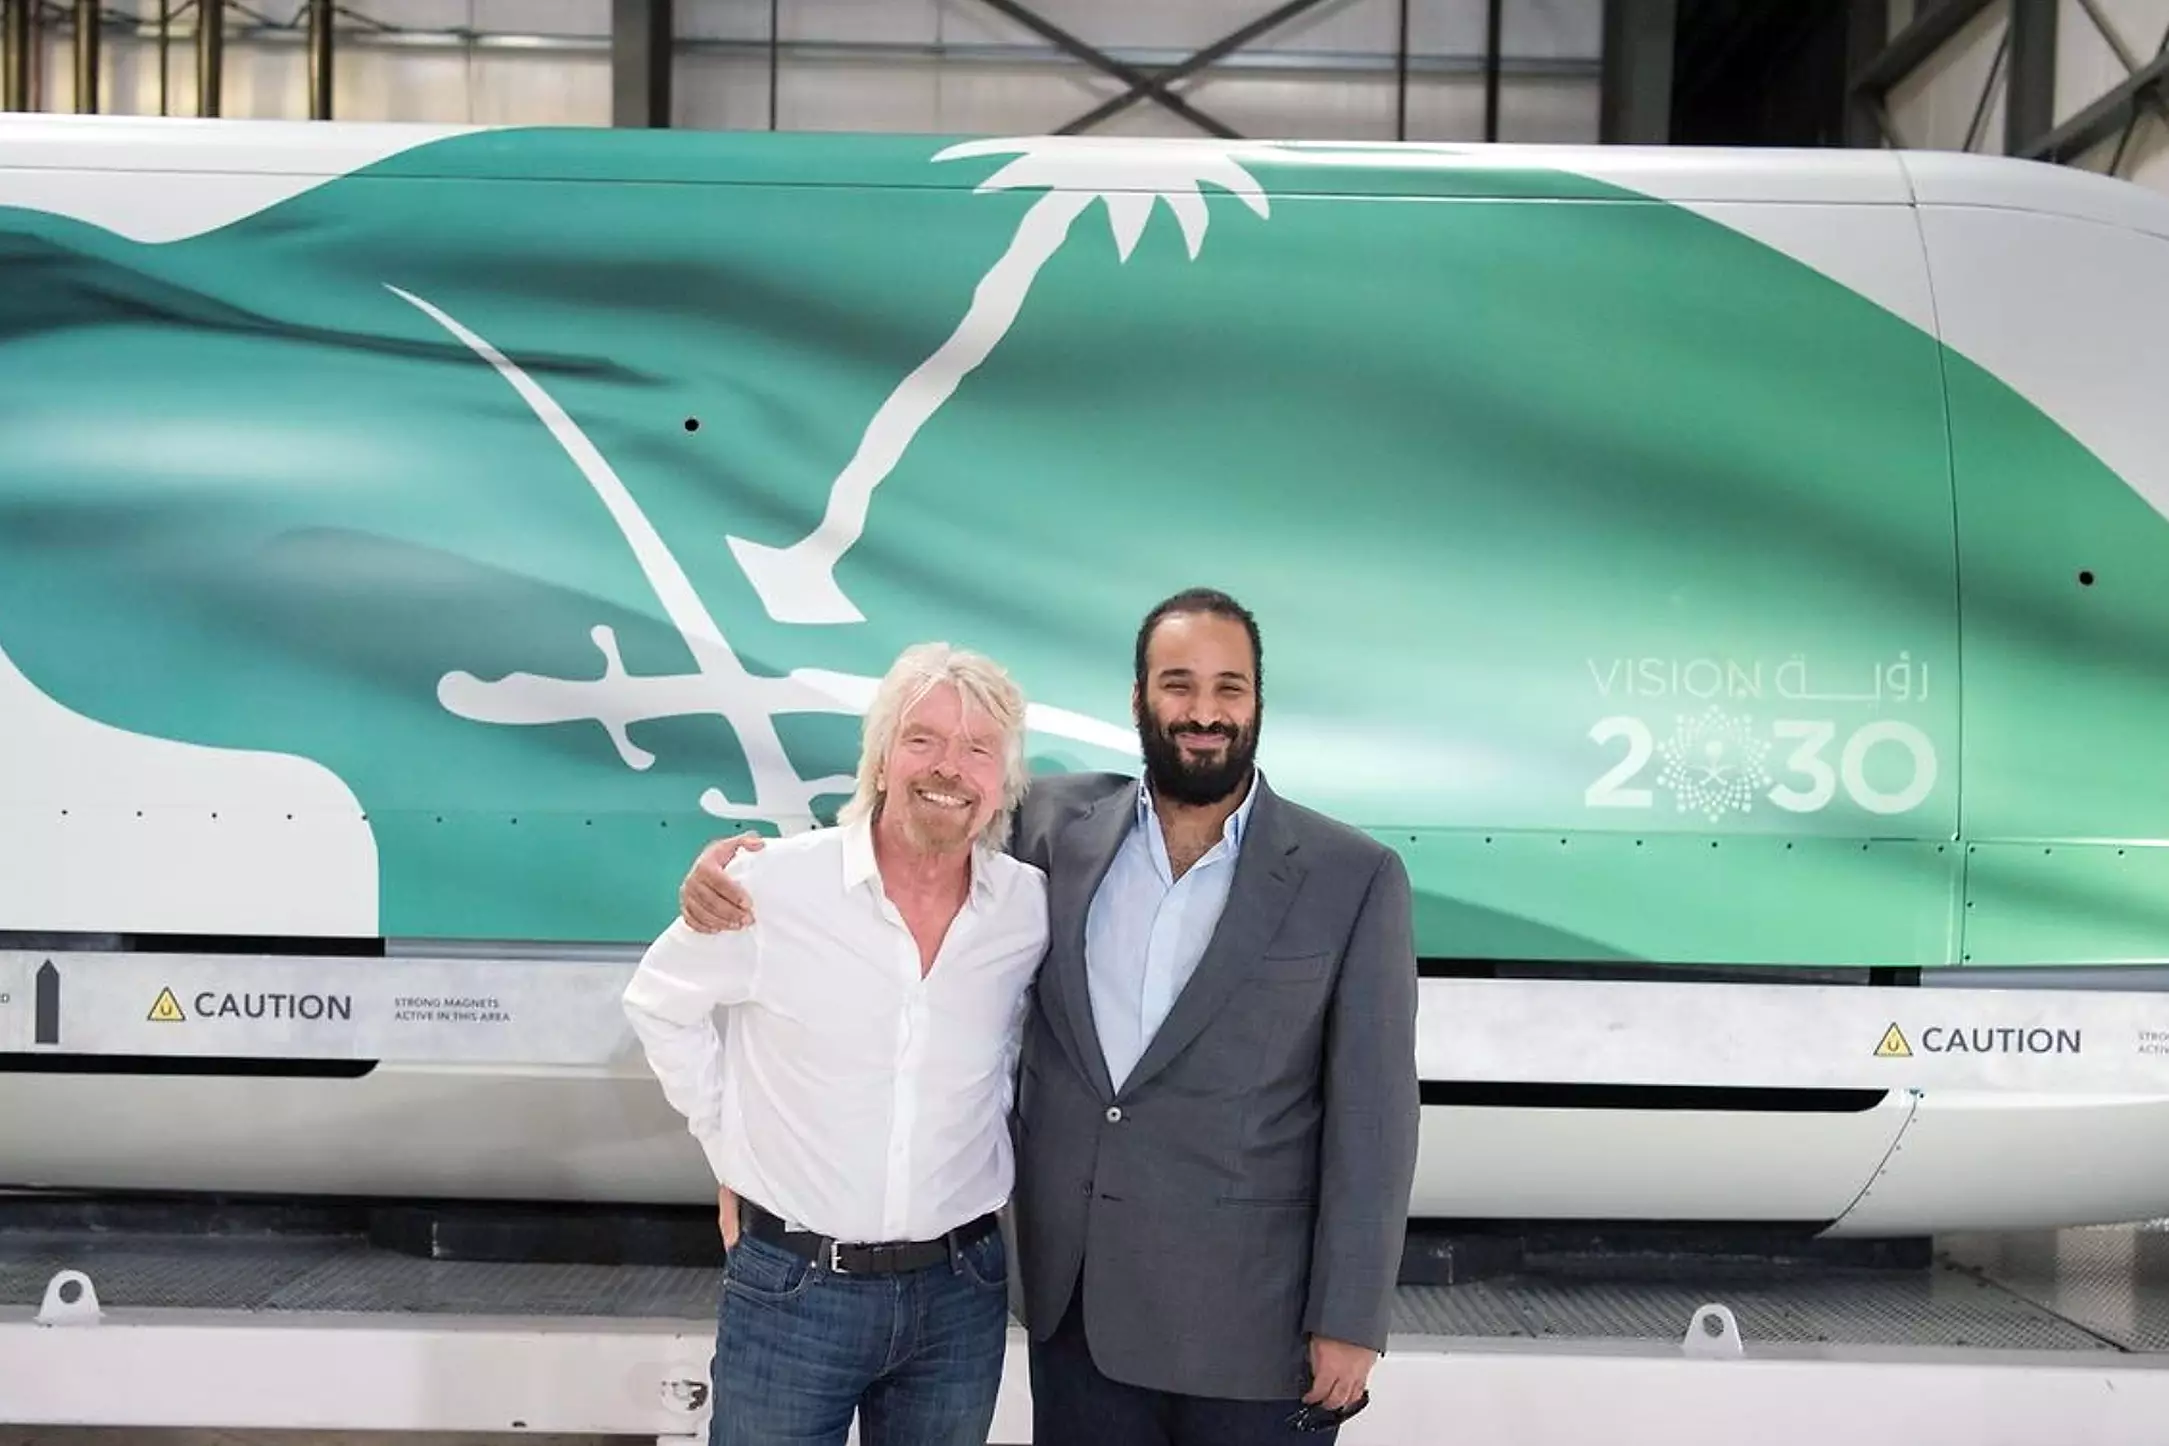 Crown Prince Mohammed bin Salman with Richard Branson promoting Vision 2030.